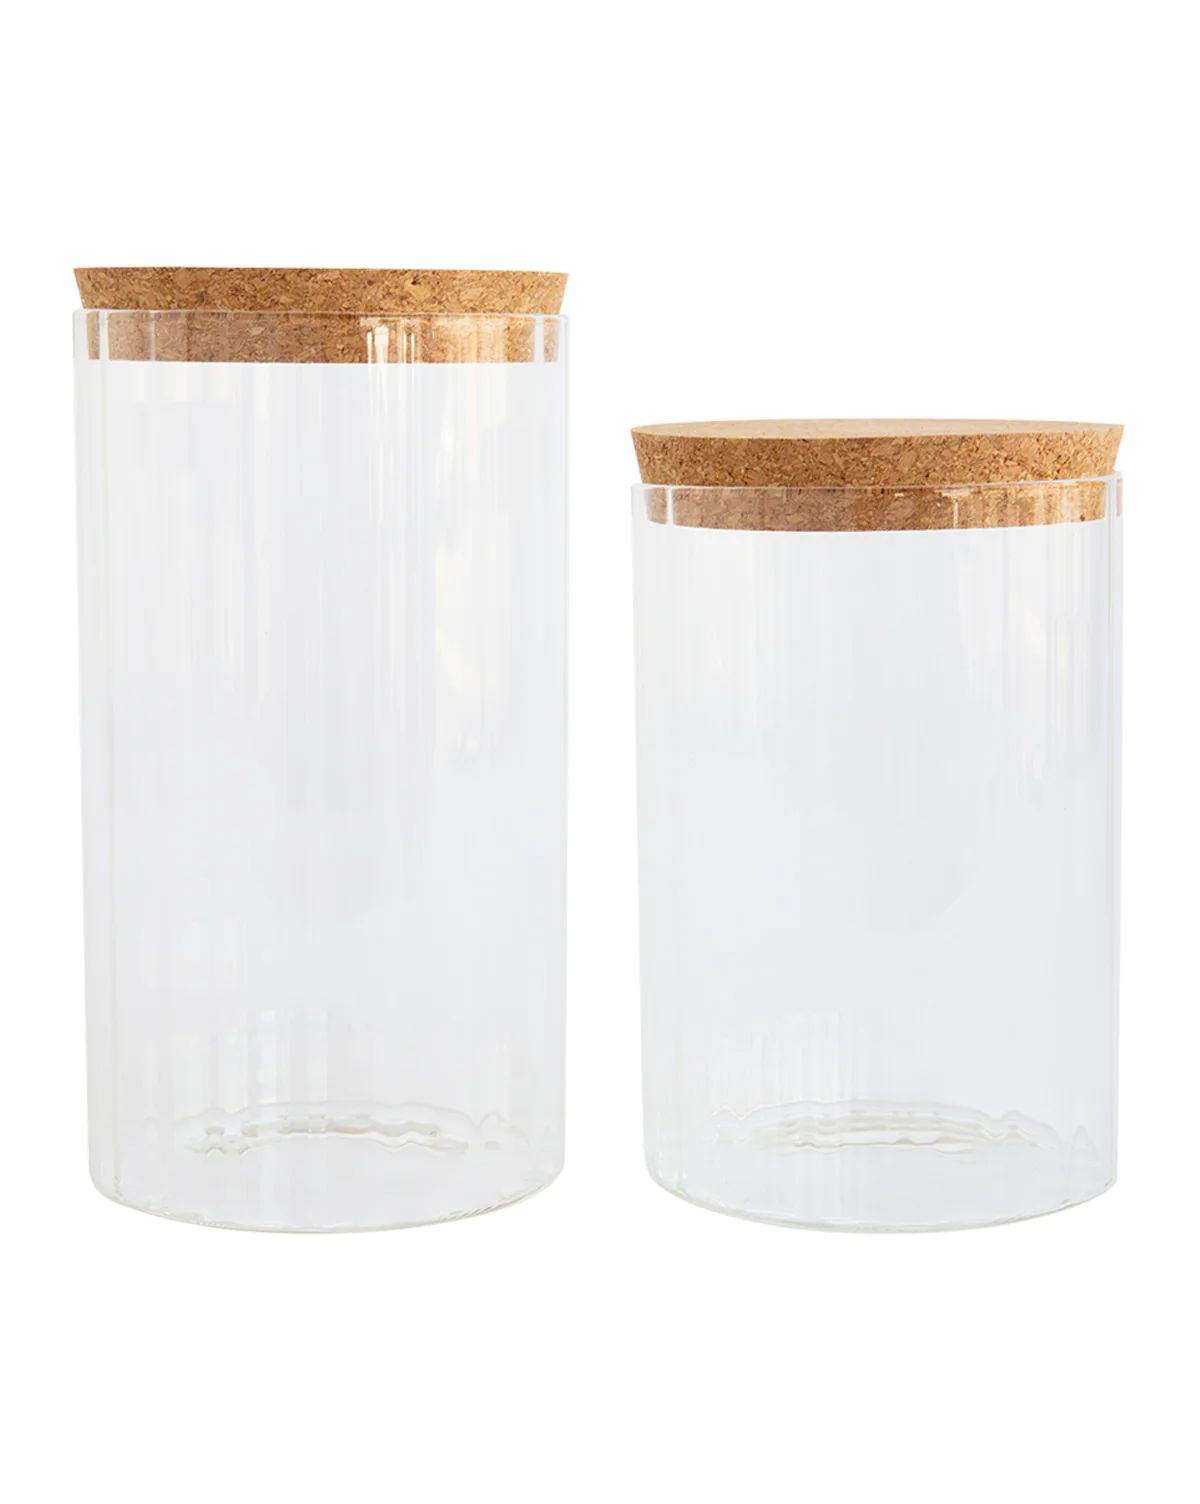 Ribbed Canister | McGee & Co.